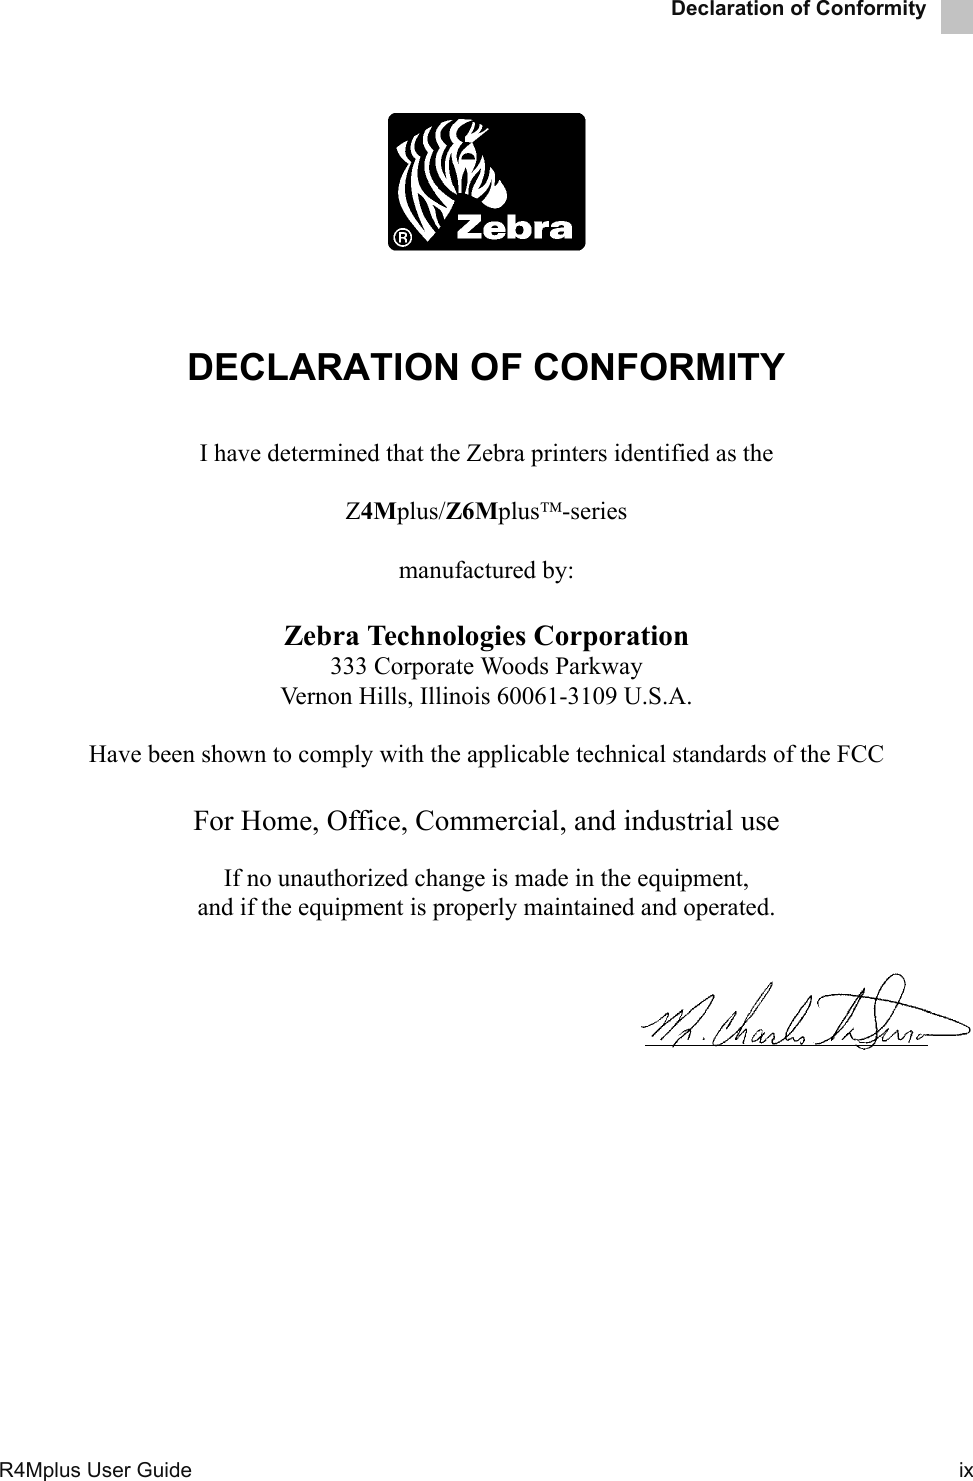 Declaration of ConformityR4Mplus User Guide  ixDECLARATION OF CONFORMITYI have determined that the Zebra printers identified as theZ4Mplus/Z6Mplus-seriesmanufactured by:Zebra Technologies Corporation333 Corporate Woods ParkwayVernon Hills, Illinois 60061-3109 U.S.A.Have been shown to comply with the applicable technical standards of the FCCFor Home, Office, Commercial, and industrial useIf no unauthorized change is made in the equipment,and if the equipment is properly maintained and operated.